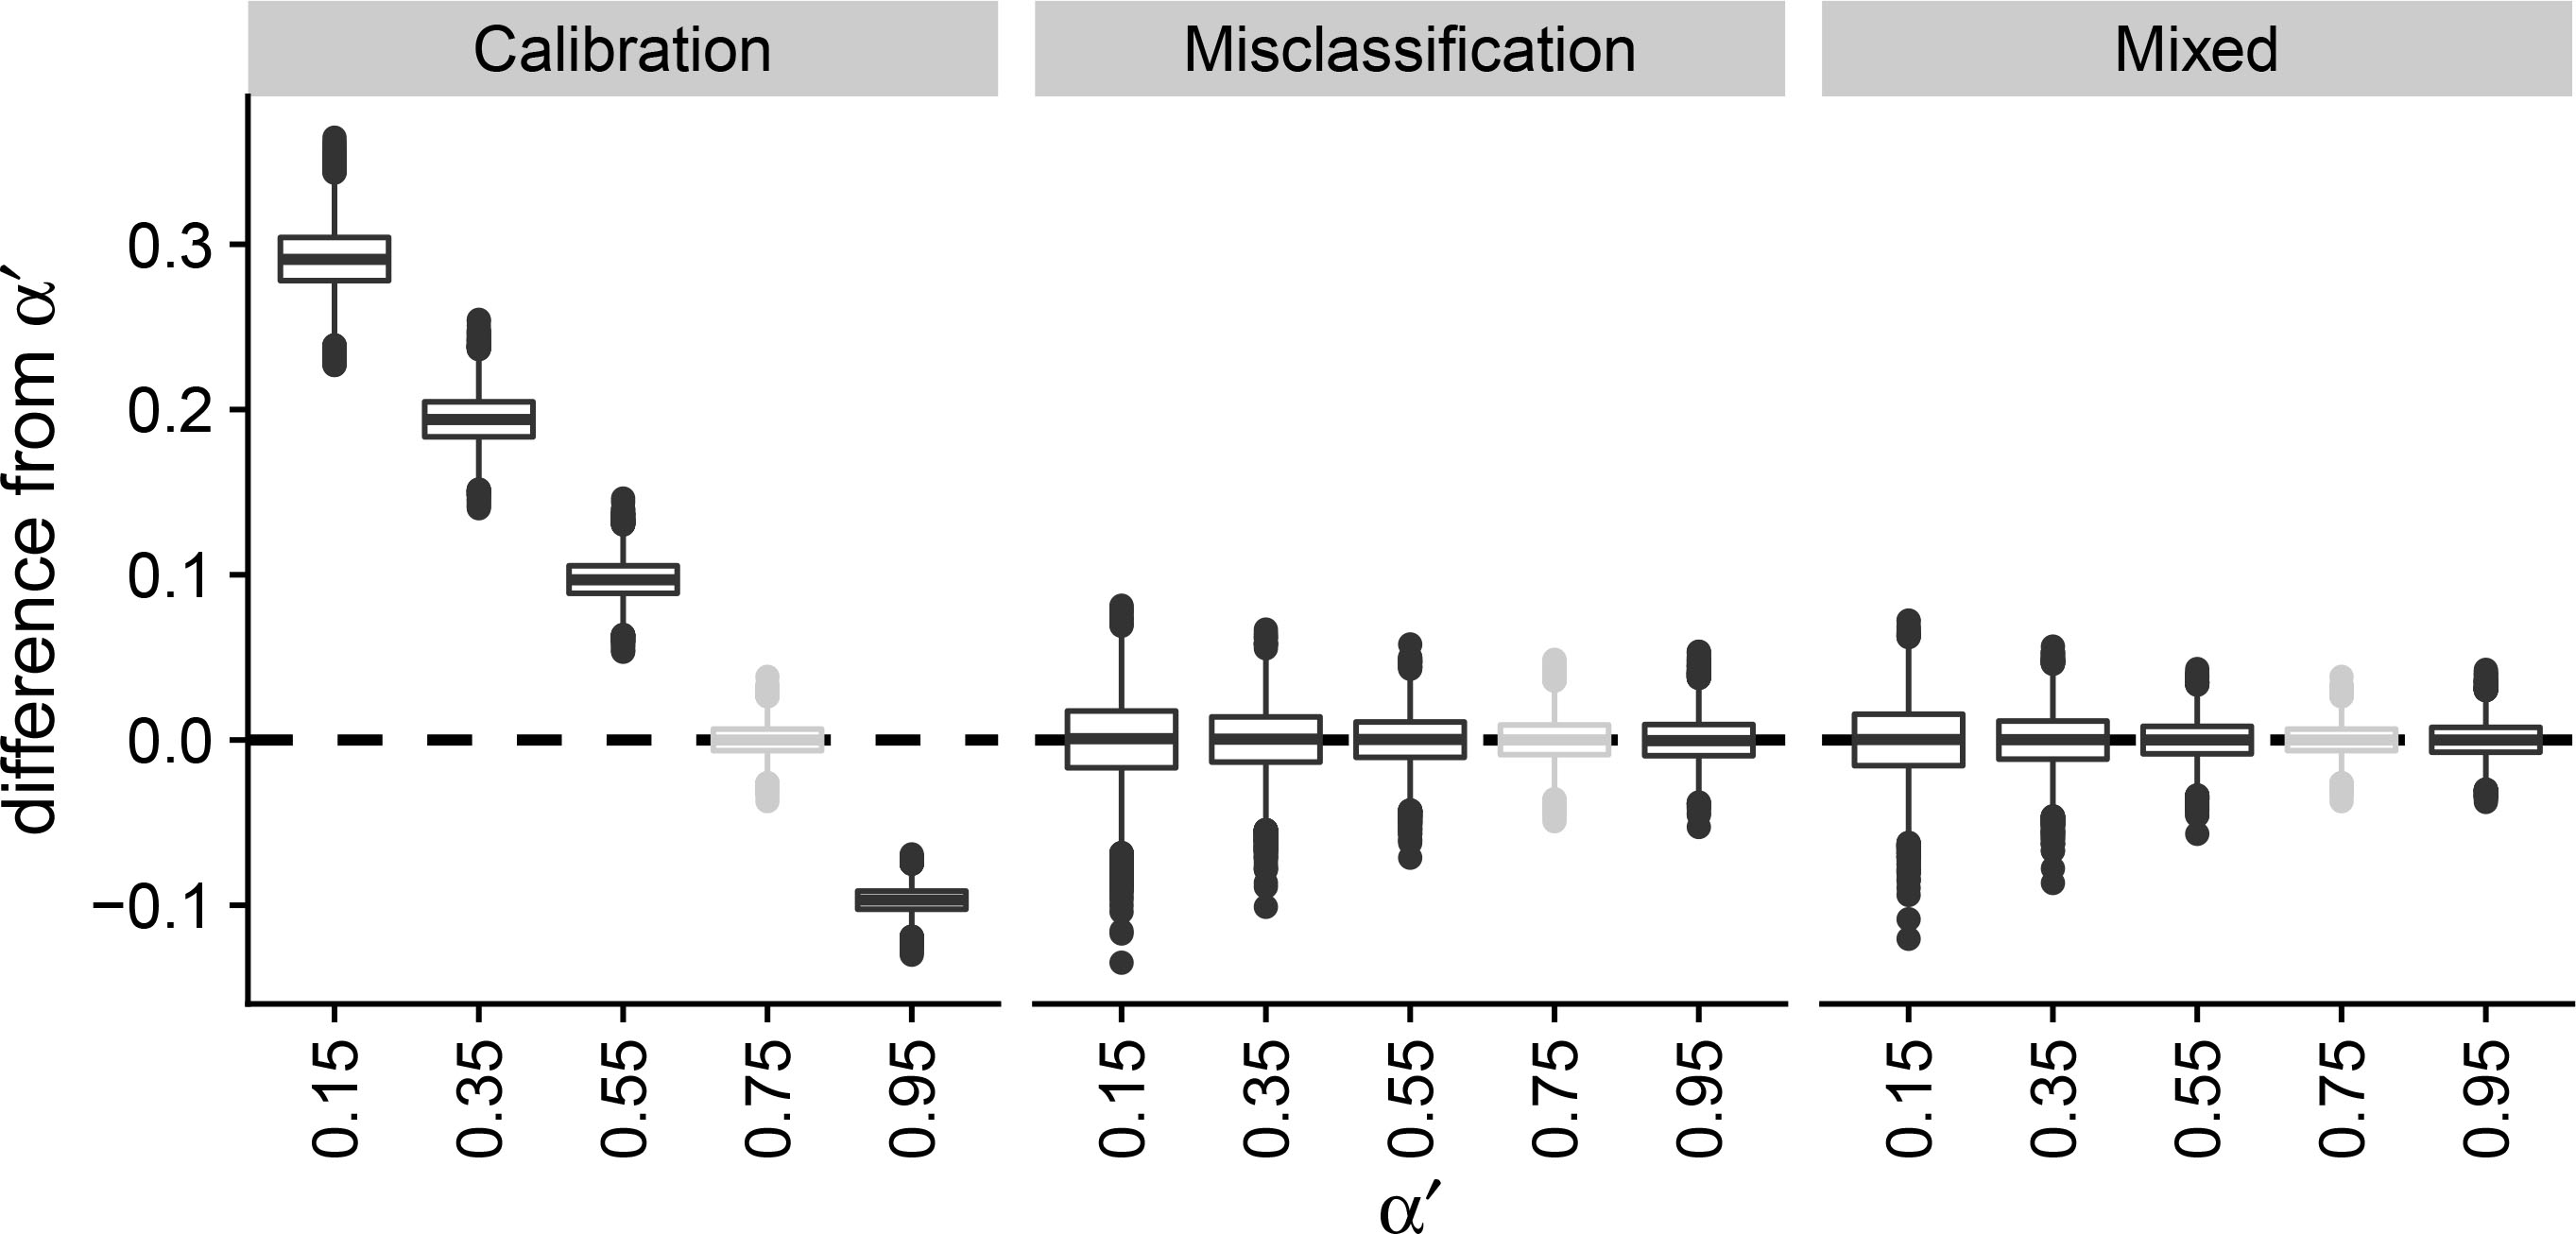 Simulation study to observe the change in prediction error under concept drift using boxplots. The calibration, misclassification and mixed estimator are compared given an initial base rate α=0.75 (grey) and different values of α′ (black). The test set is sampled from the target population with the initial base rate. The x-axis shows the different base rates and the y-axis shows the distribution of the difference from the new base rate α′. All the parameters: p00=0.85, p11=0.90, n=1,000, N=3×105 and B=10,000.